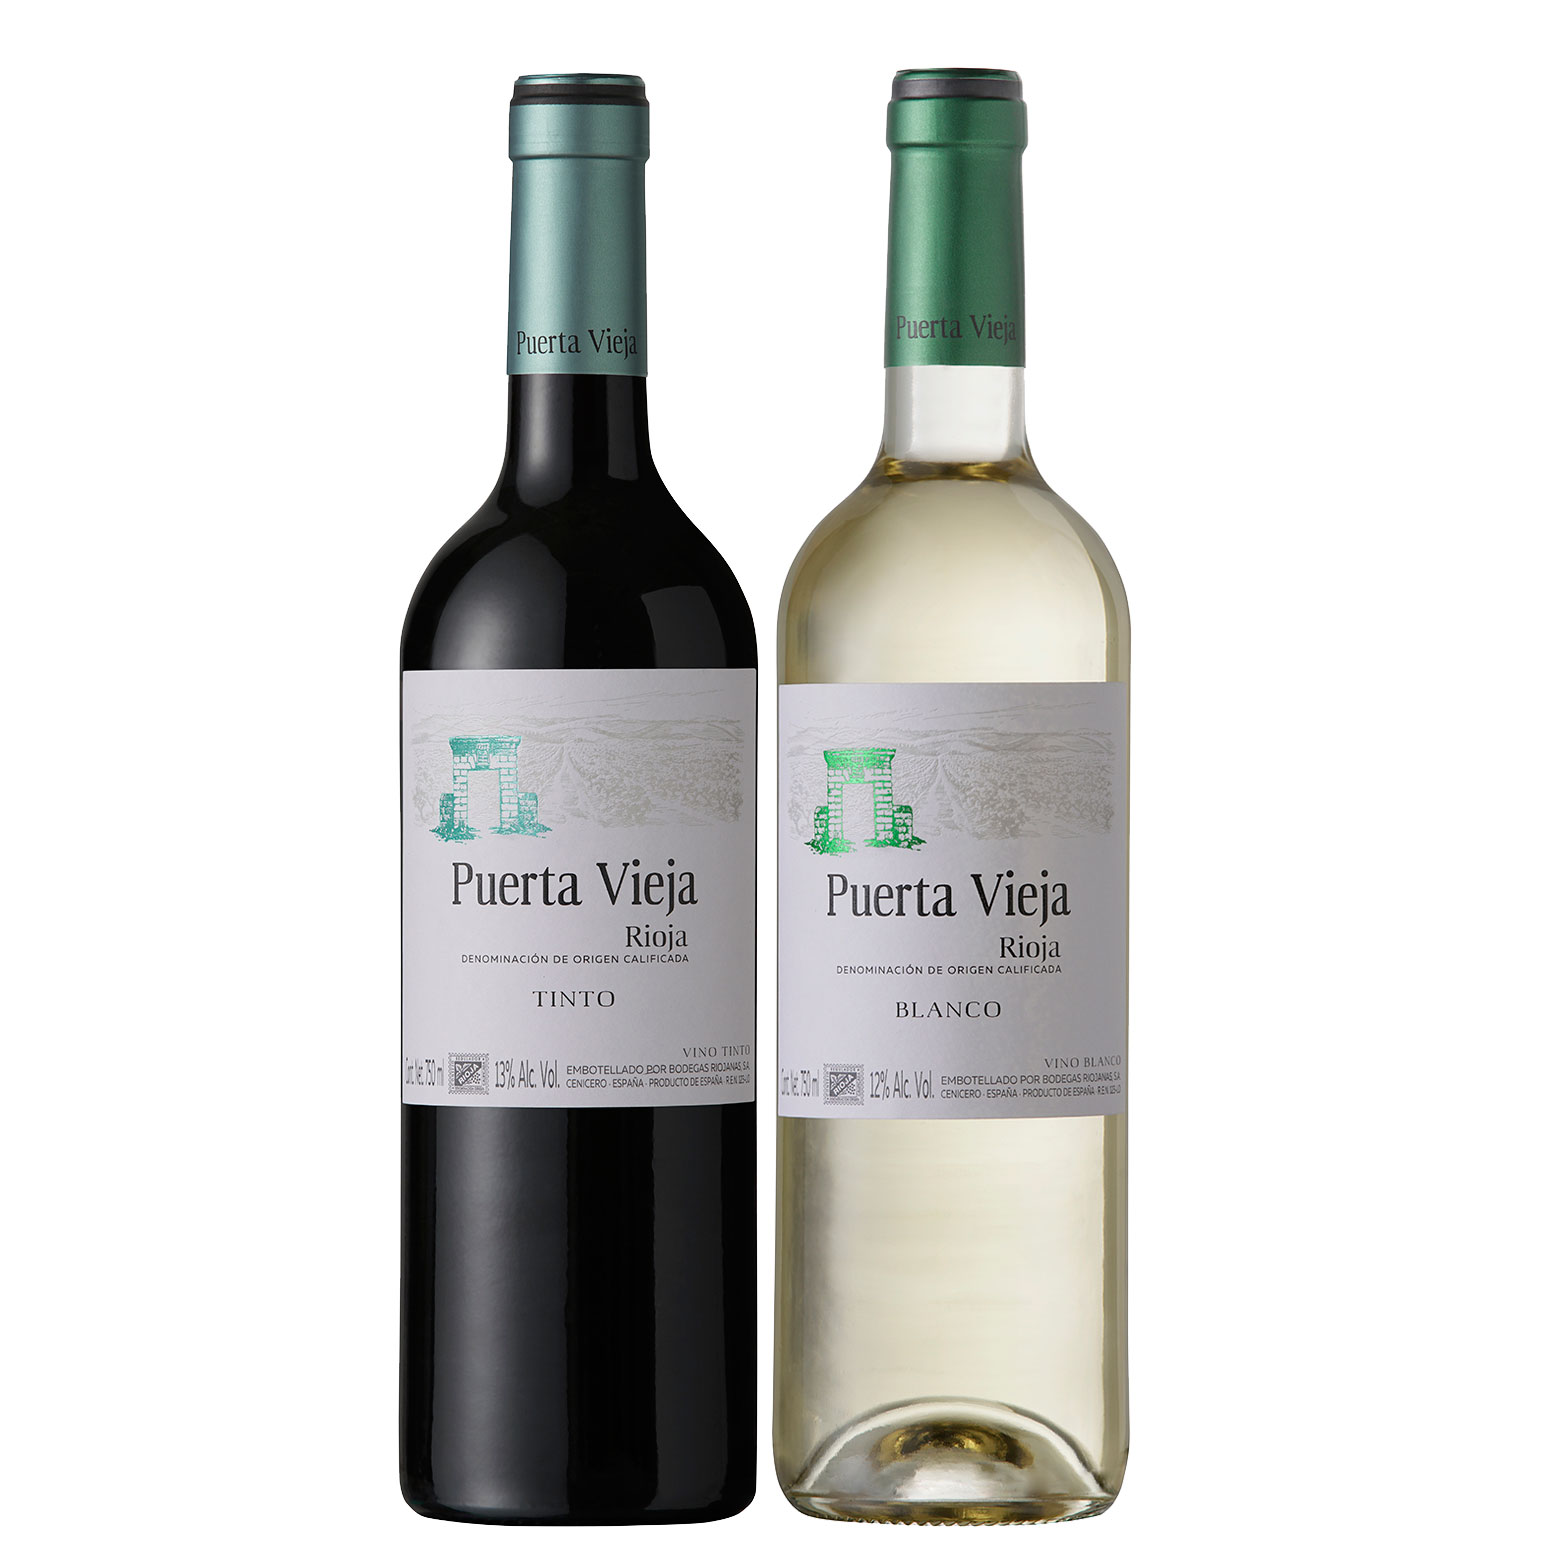 Buy And Send Twin bottle Puerta Vieja Gift Set